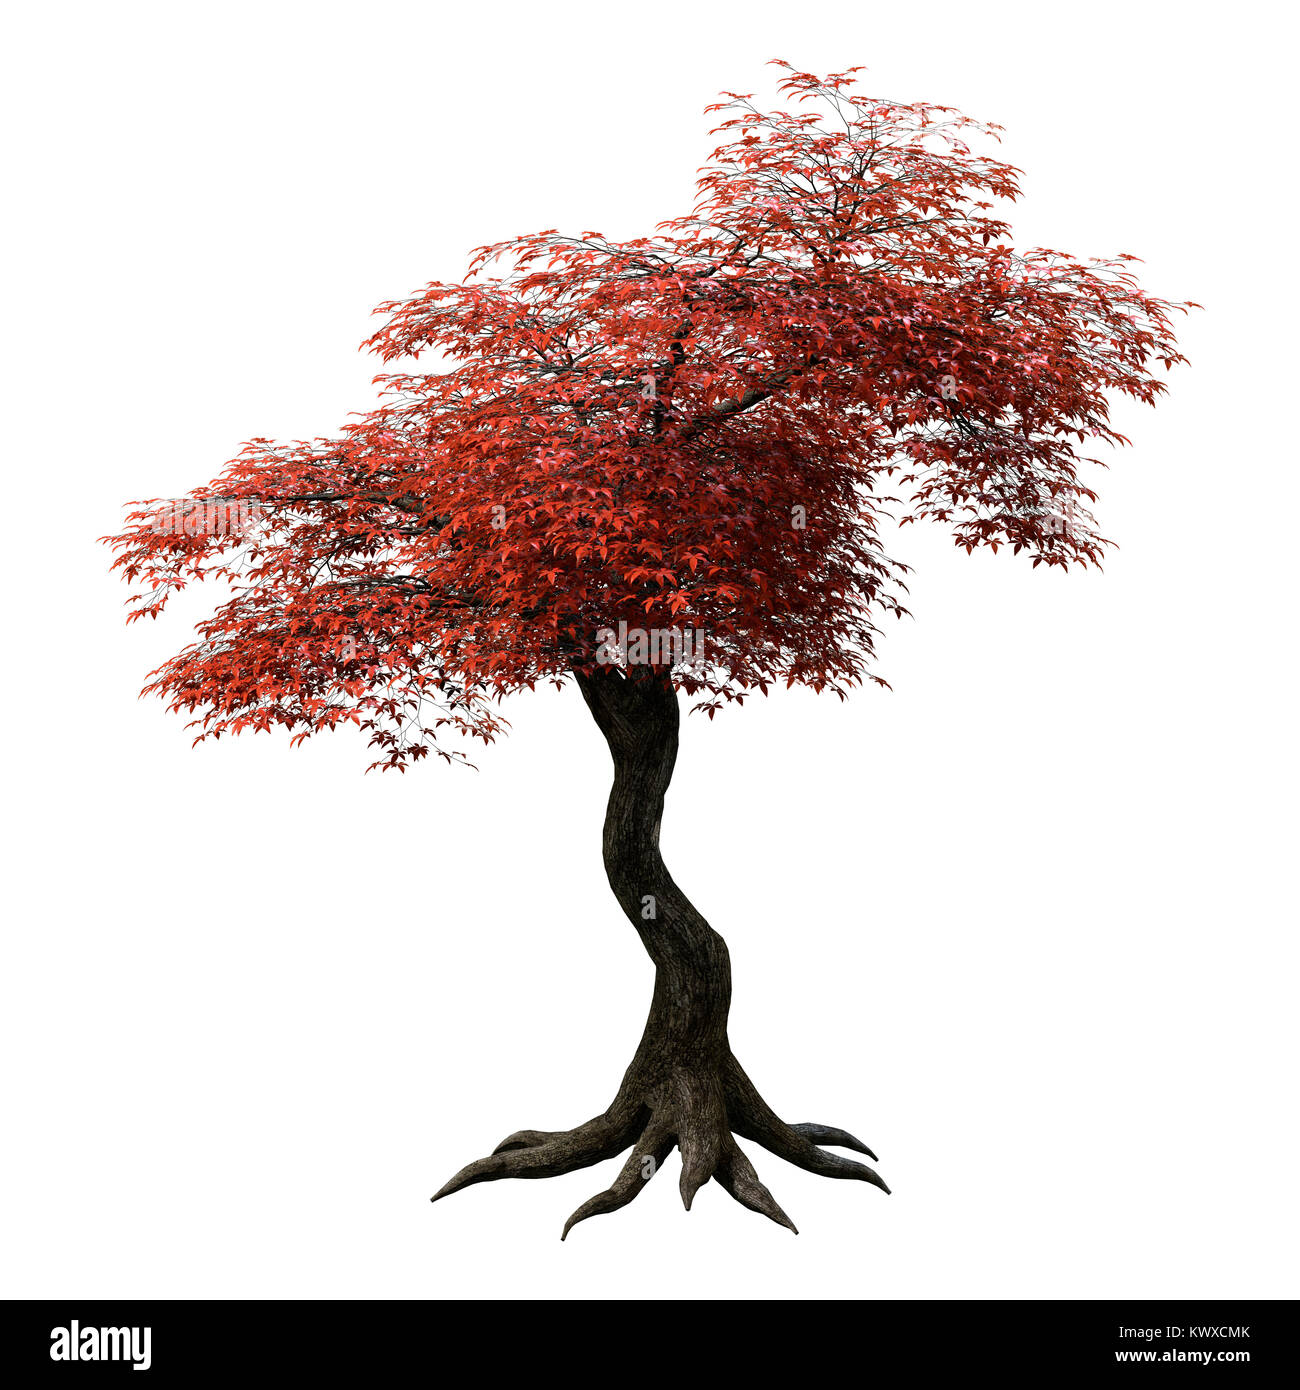 3D rendering of a red Japanese maple tree isolated on white background Stoc...